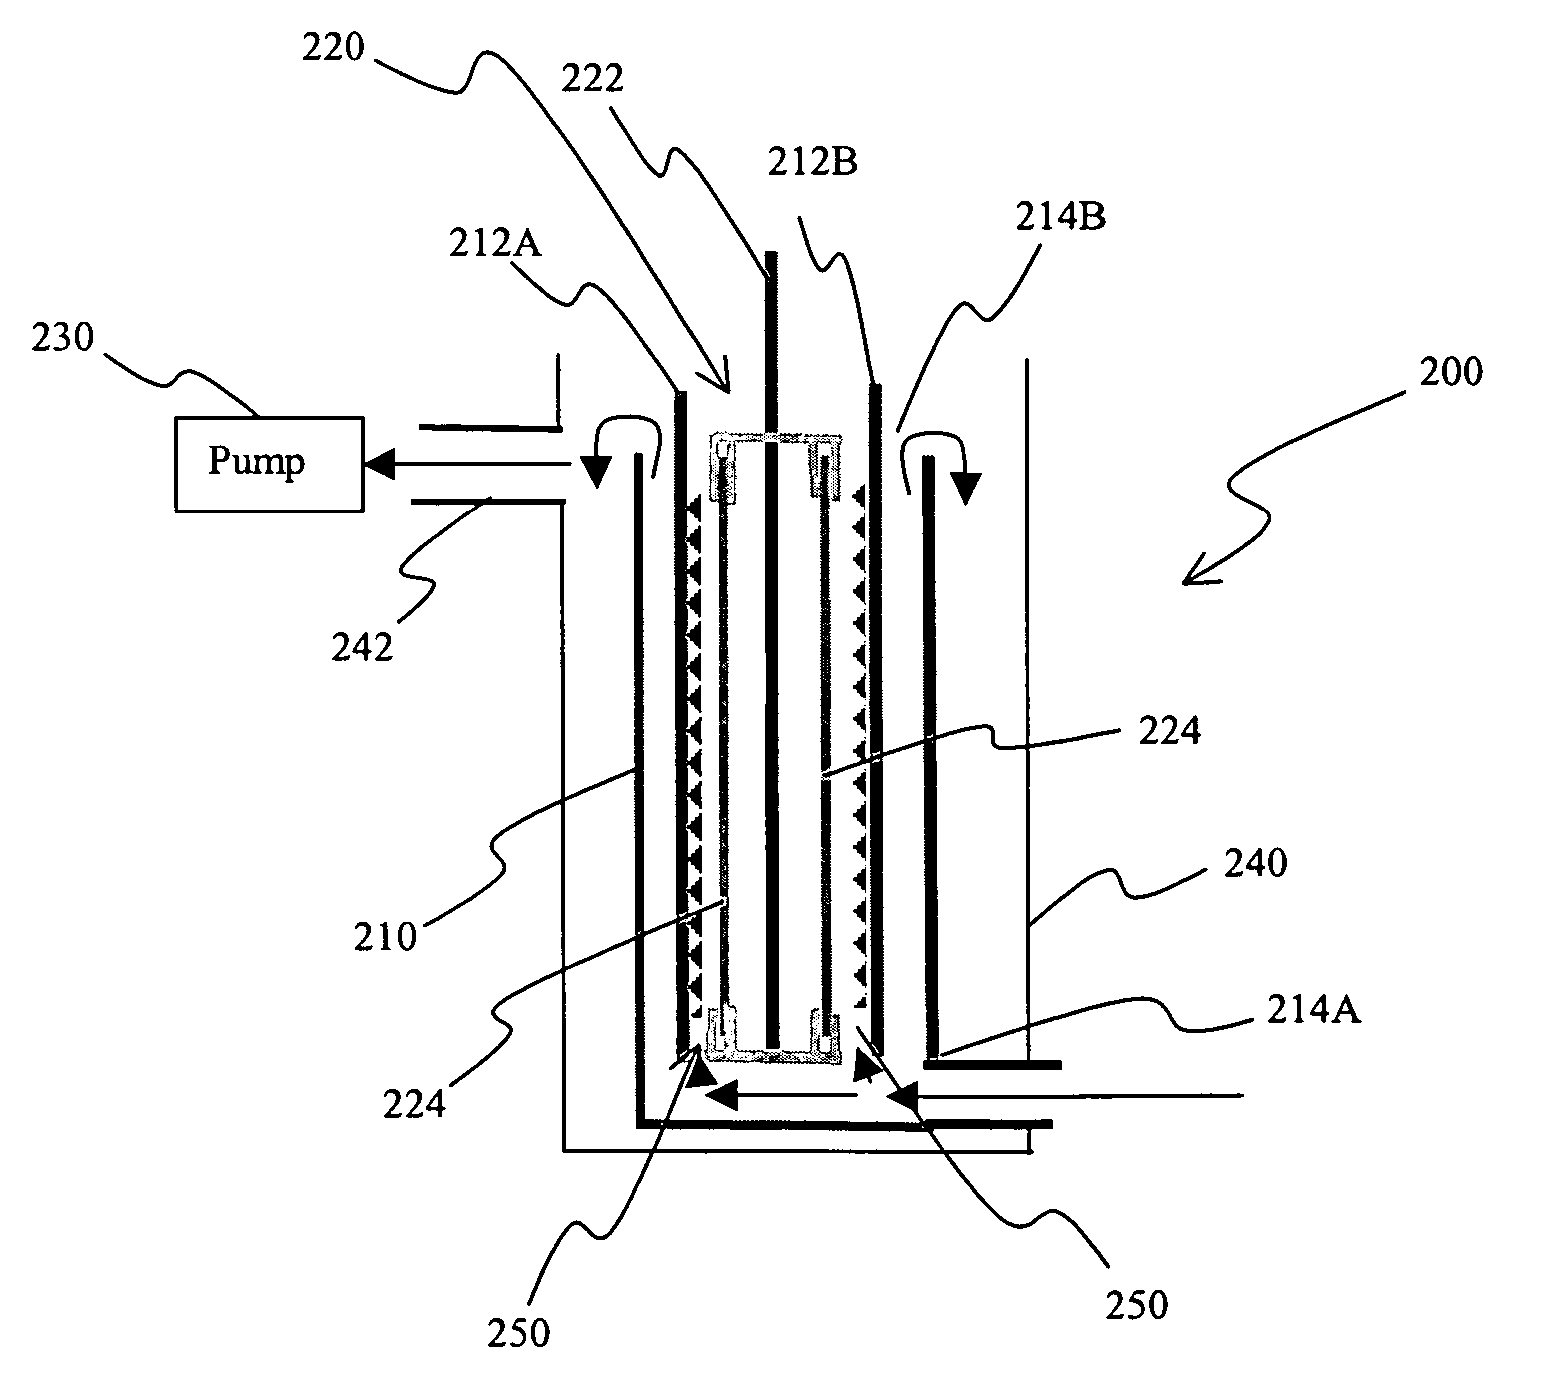 Configurations and methods of electrochemical lead recovery from contaminated soil